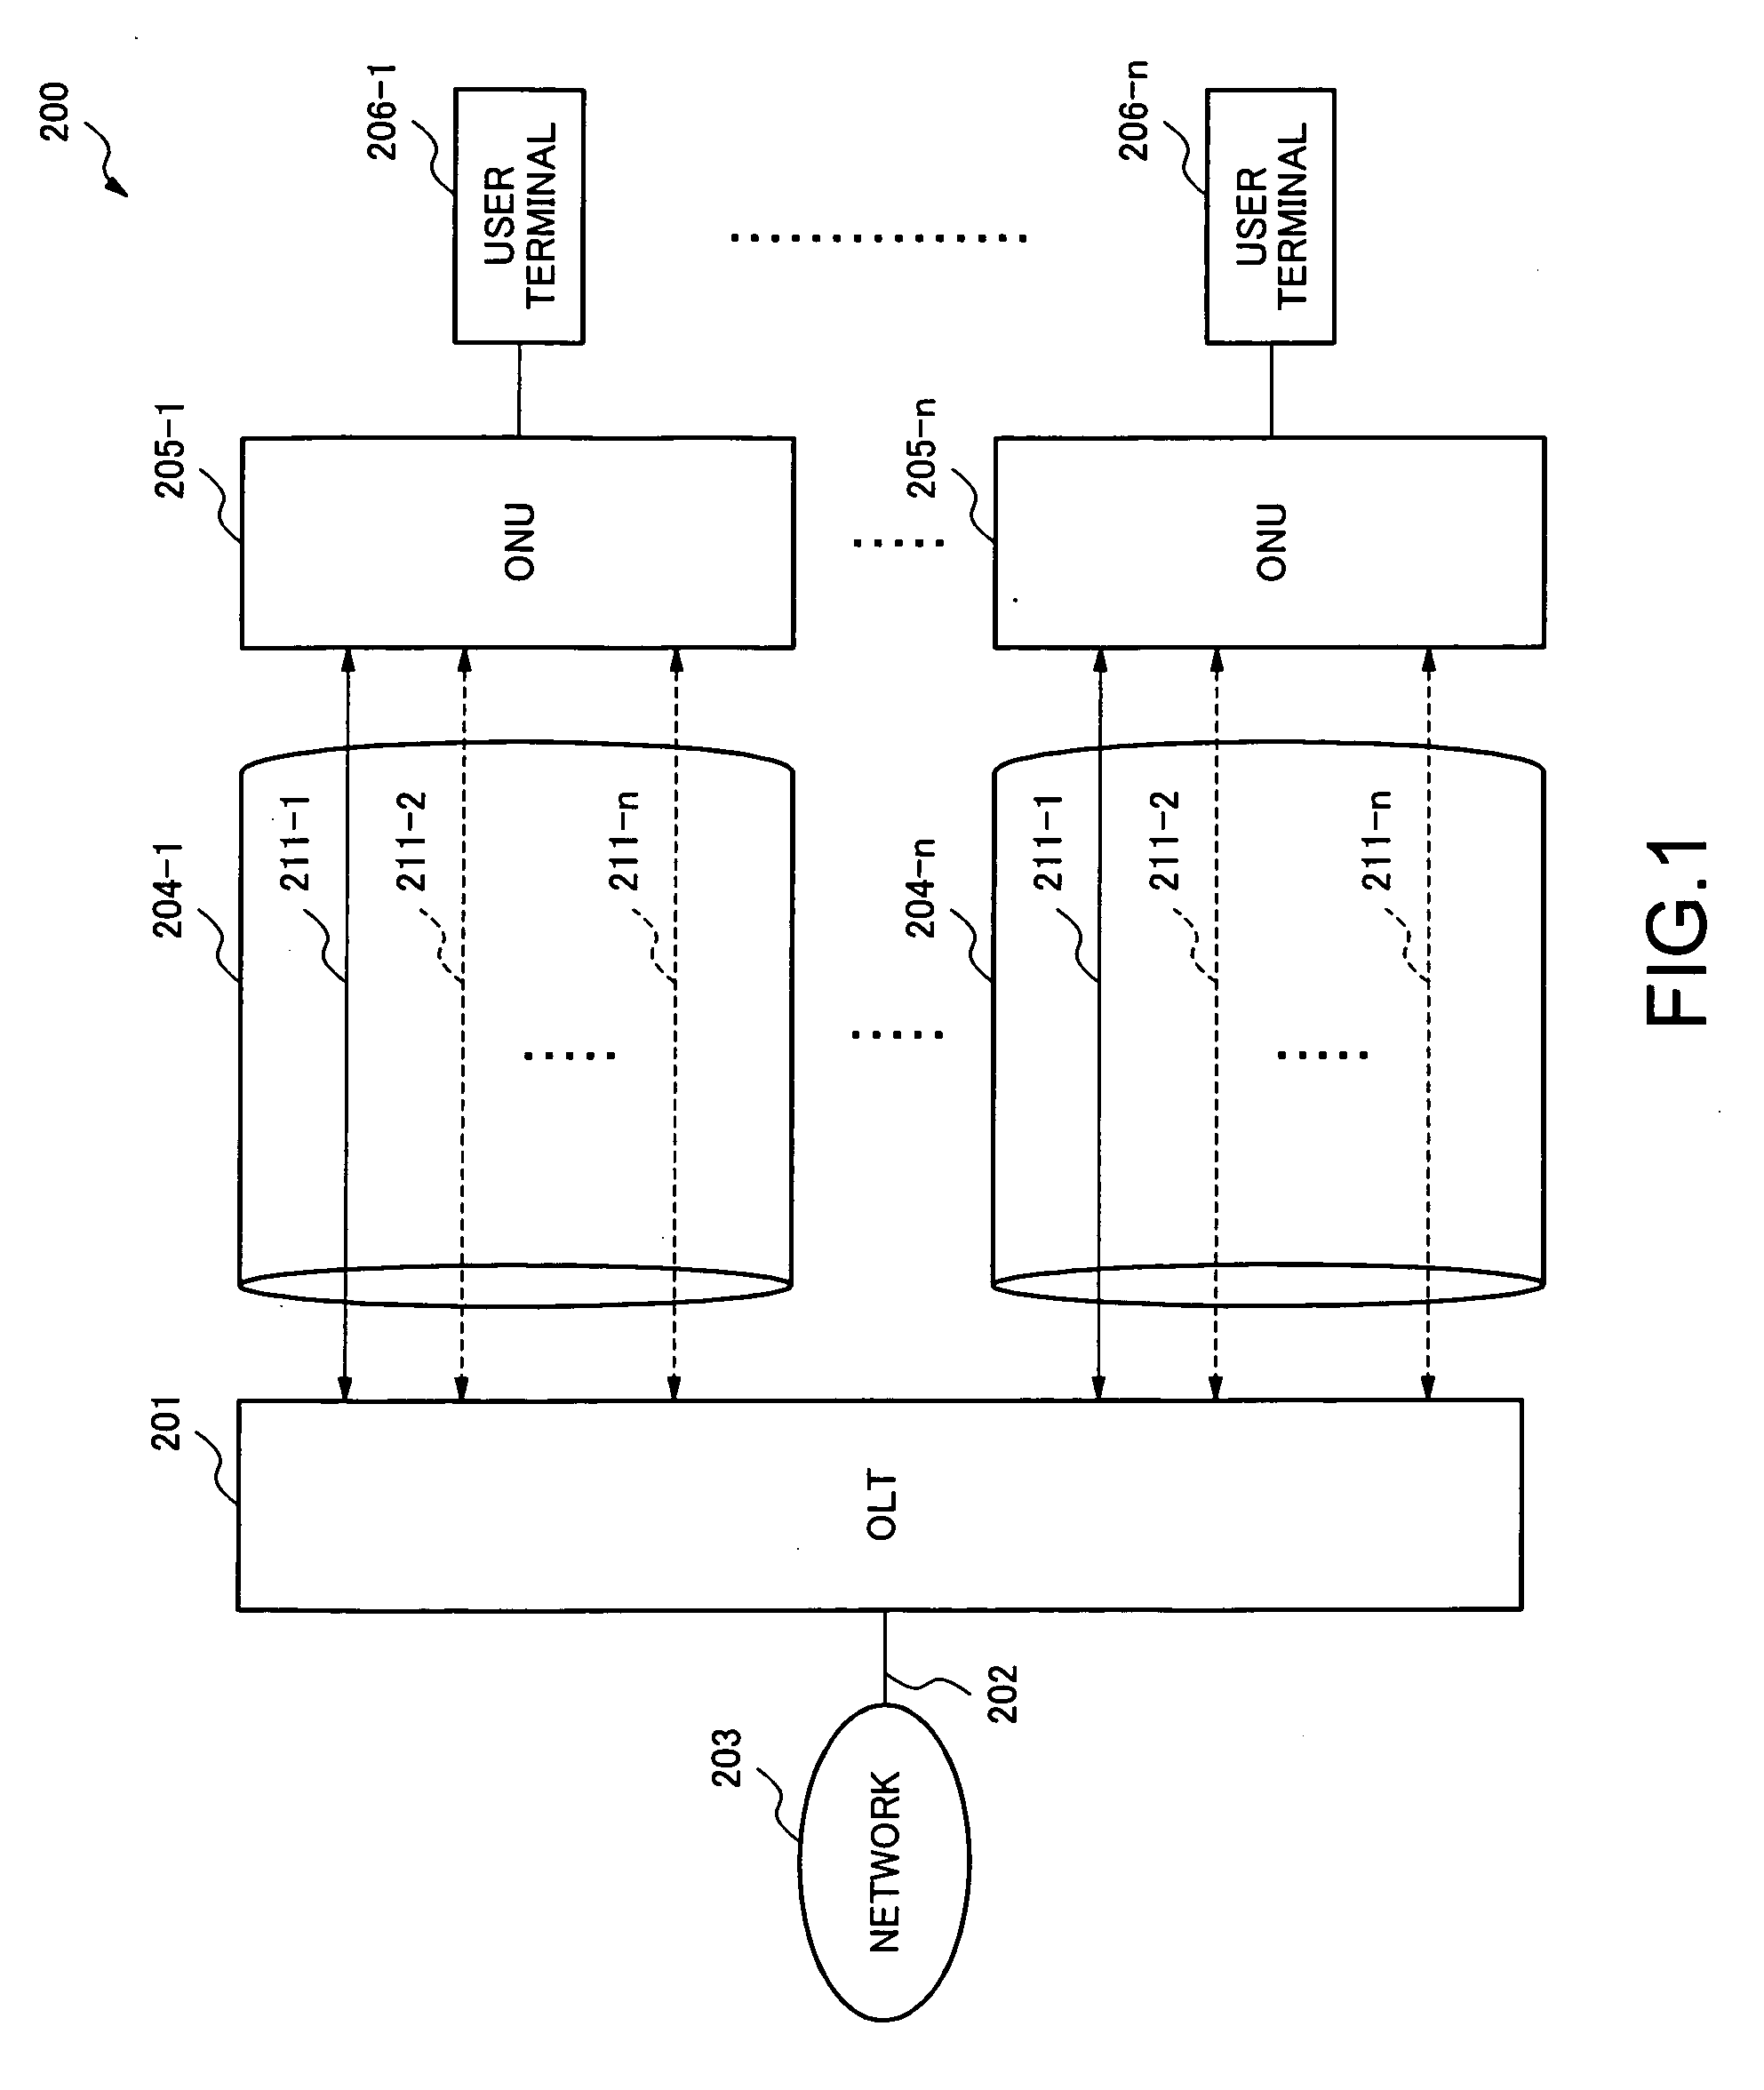 PON system and logical link allocation method